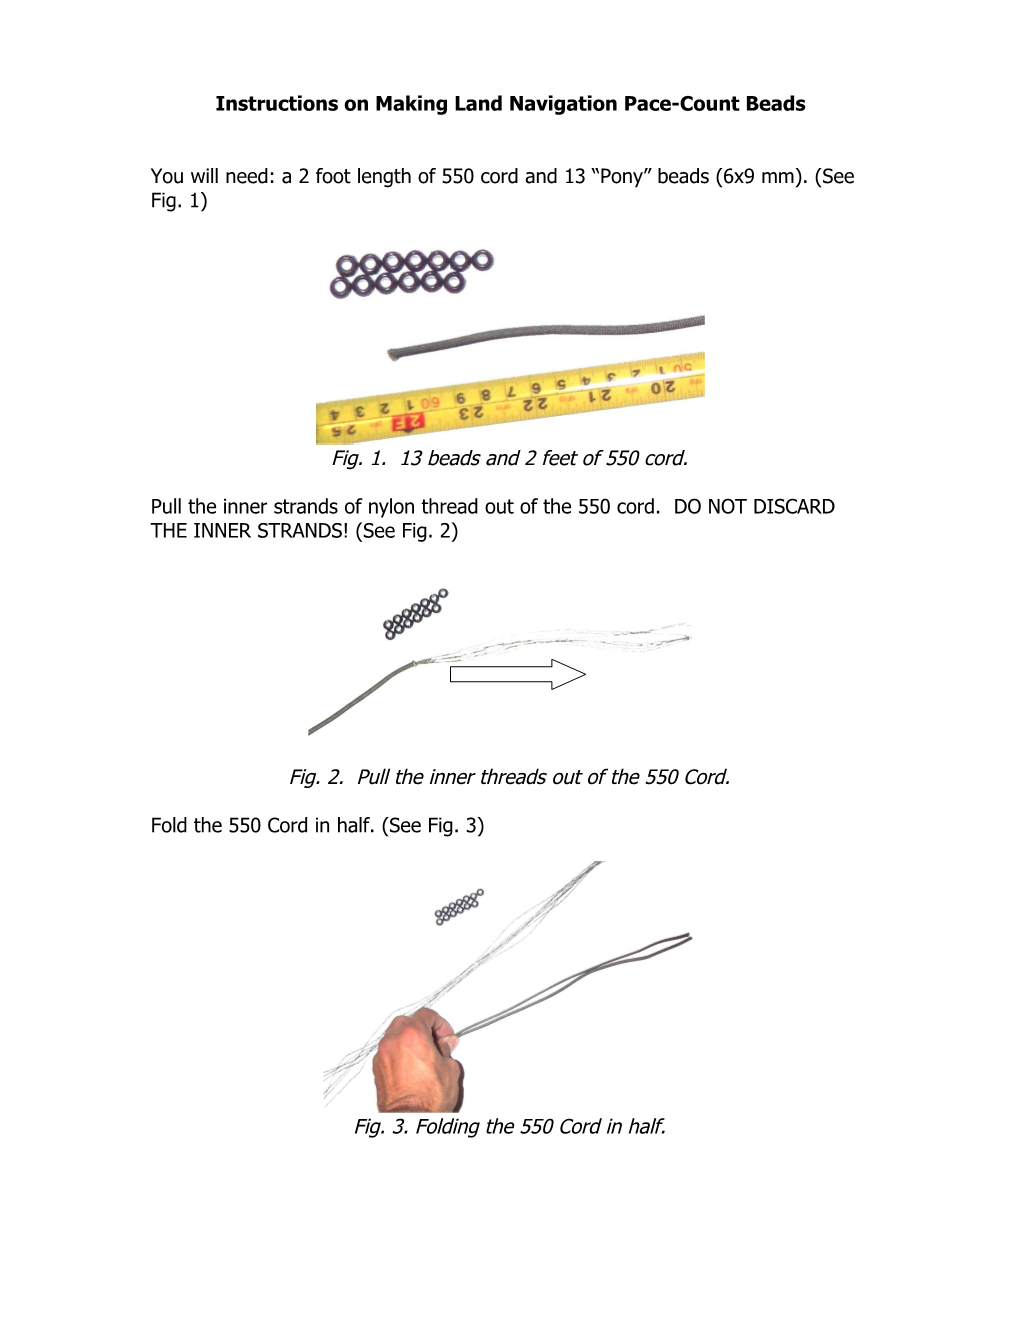 Instructions on Making Land Navigation Pace-Count Beads